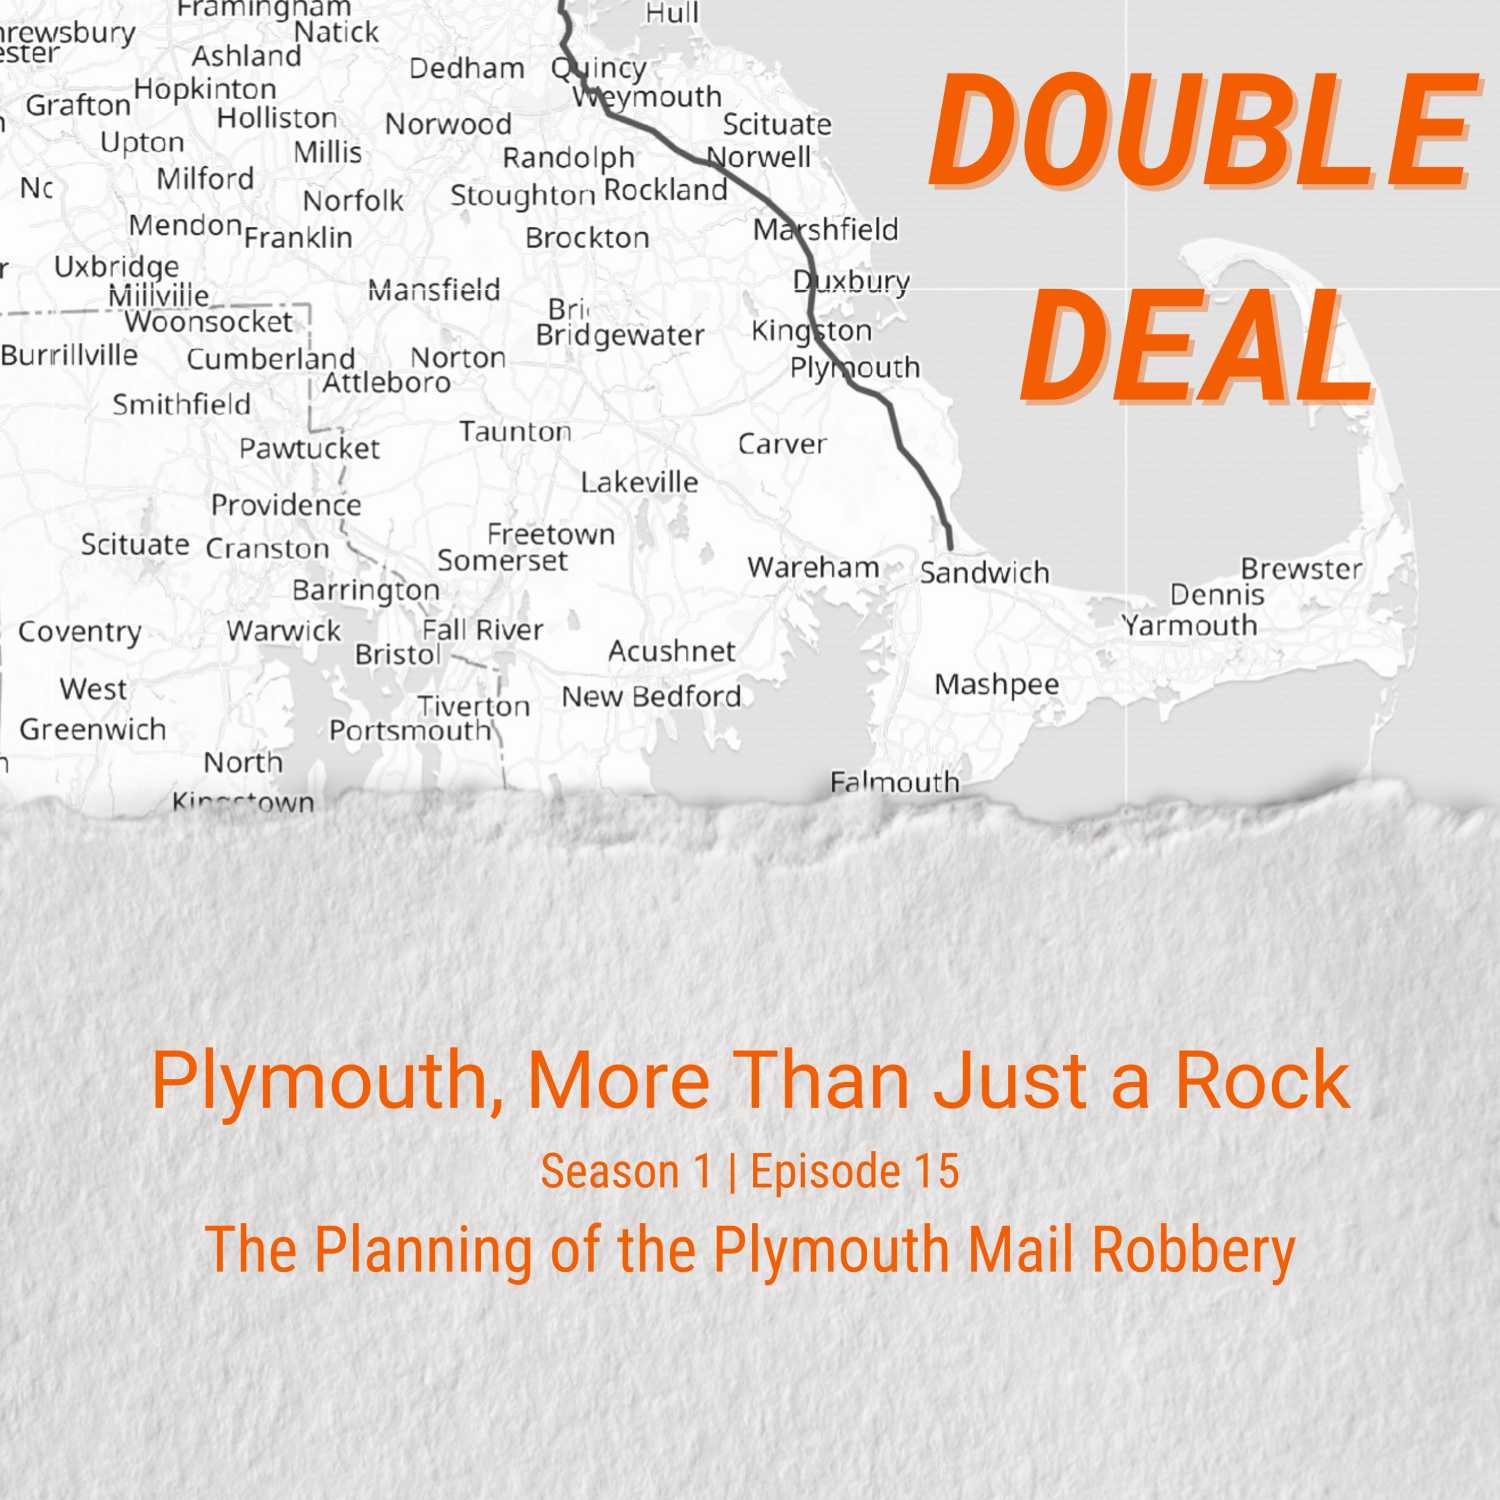 Episode image for Plymouth, More Than Just a Rock - The Planning of the Plymouth Mail Robbery